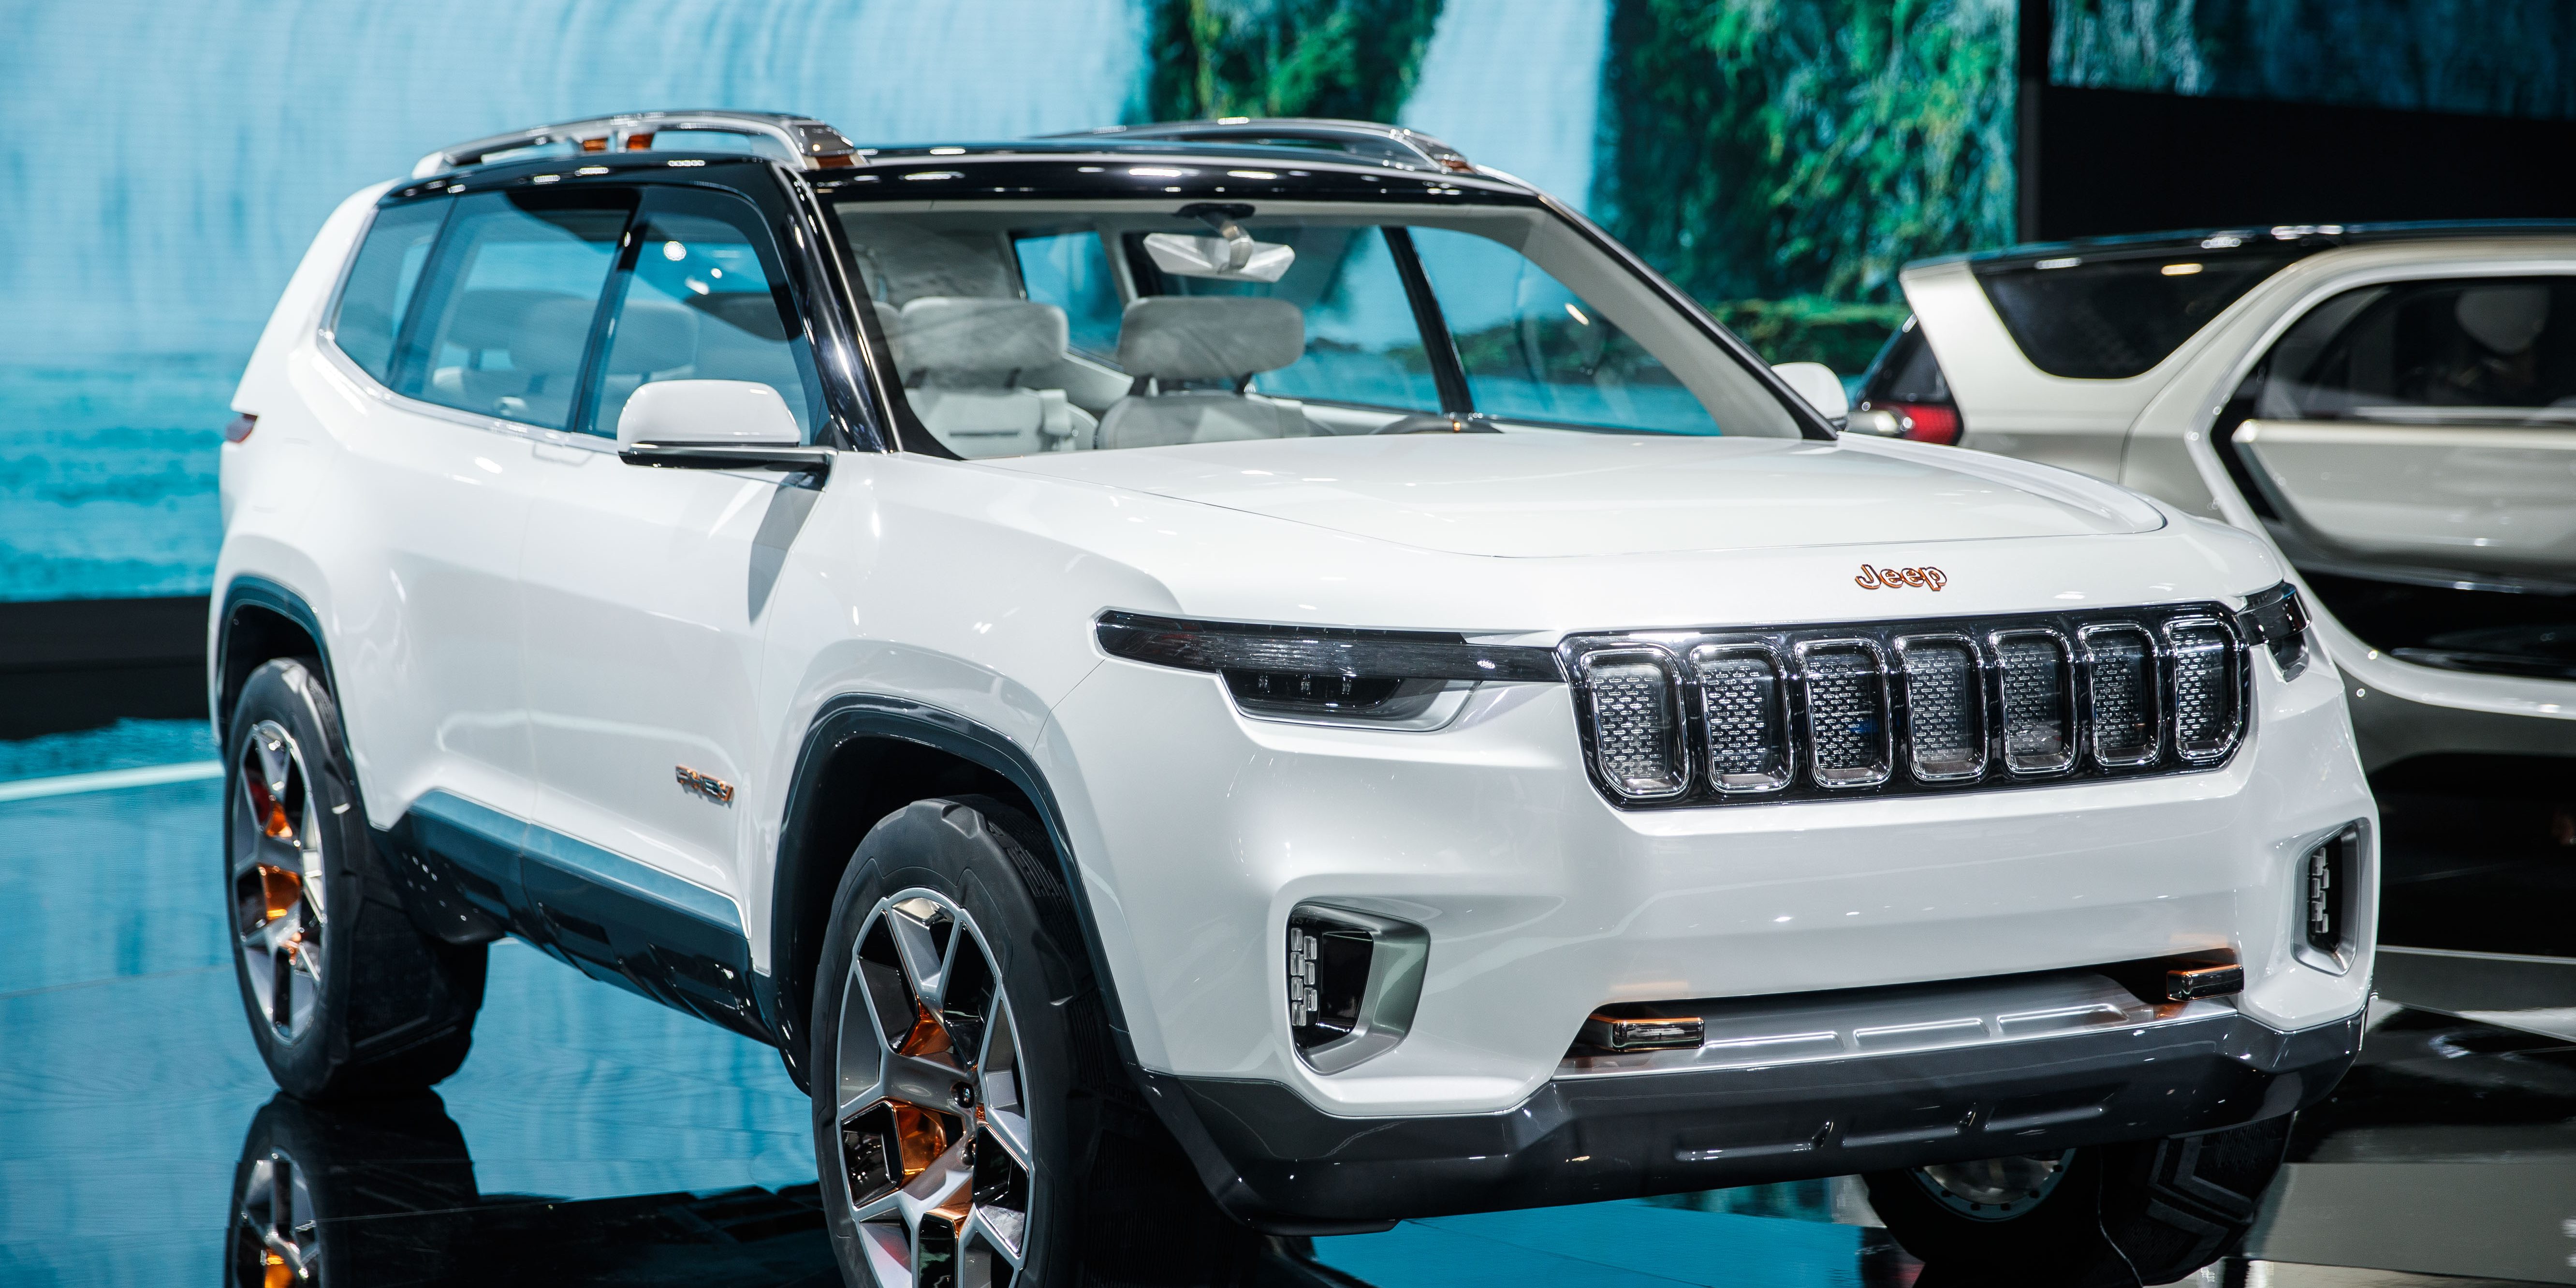 Jeep's plug-in hybrid SUV concept debuts with a ~40 miles all-electric